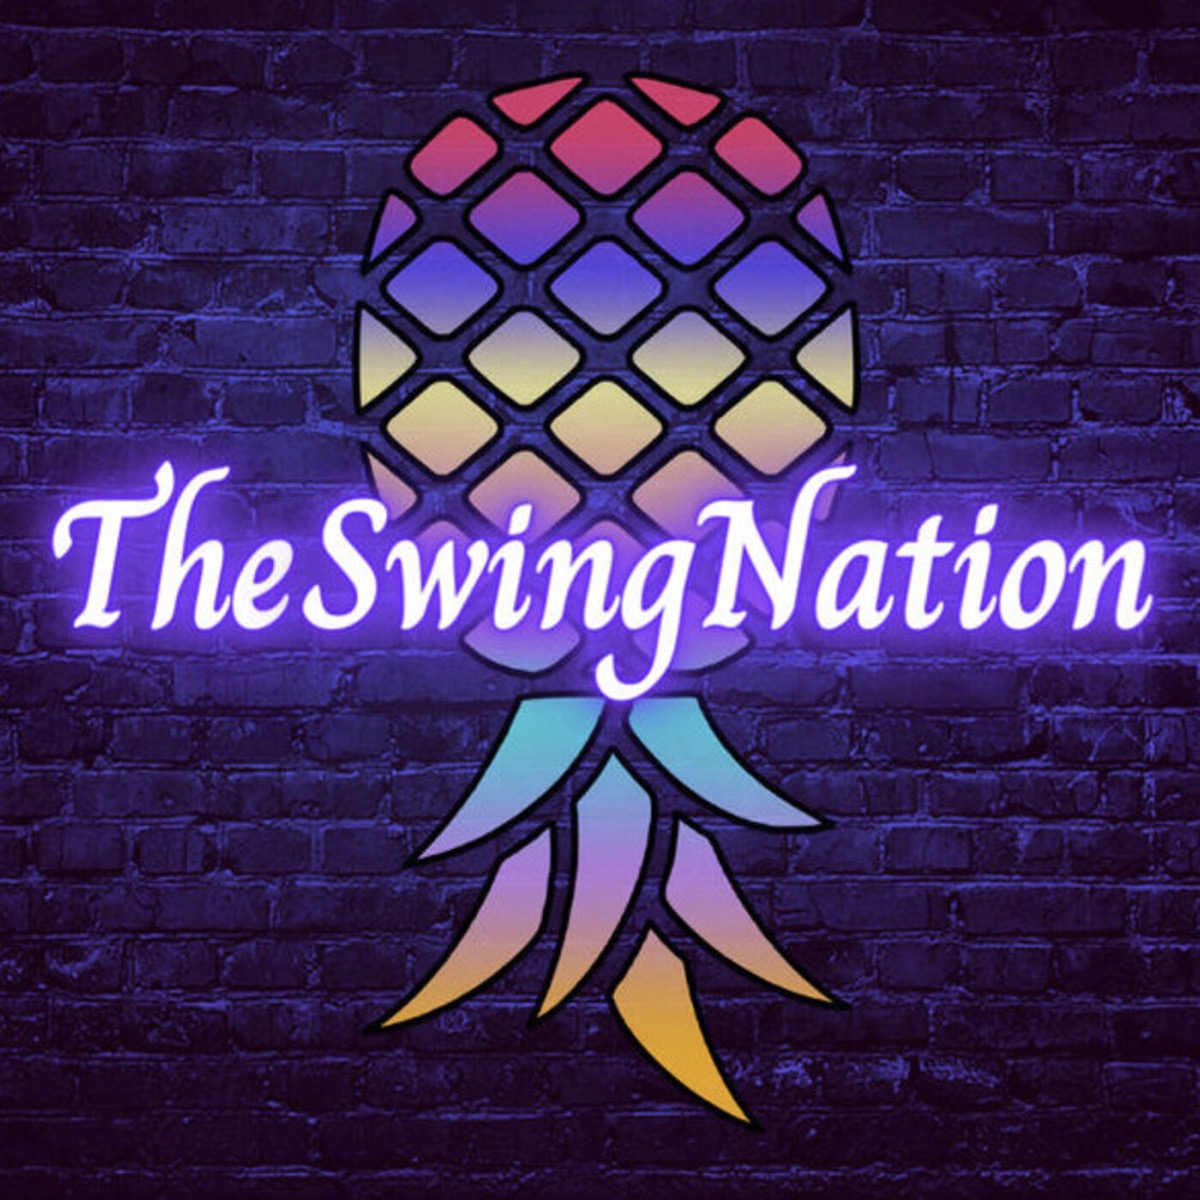 Real-Life Swinger Stories Hedonism II Takeover Part 2 - The Swing Nation pic